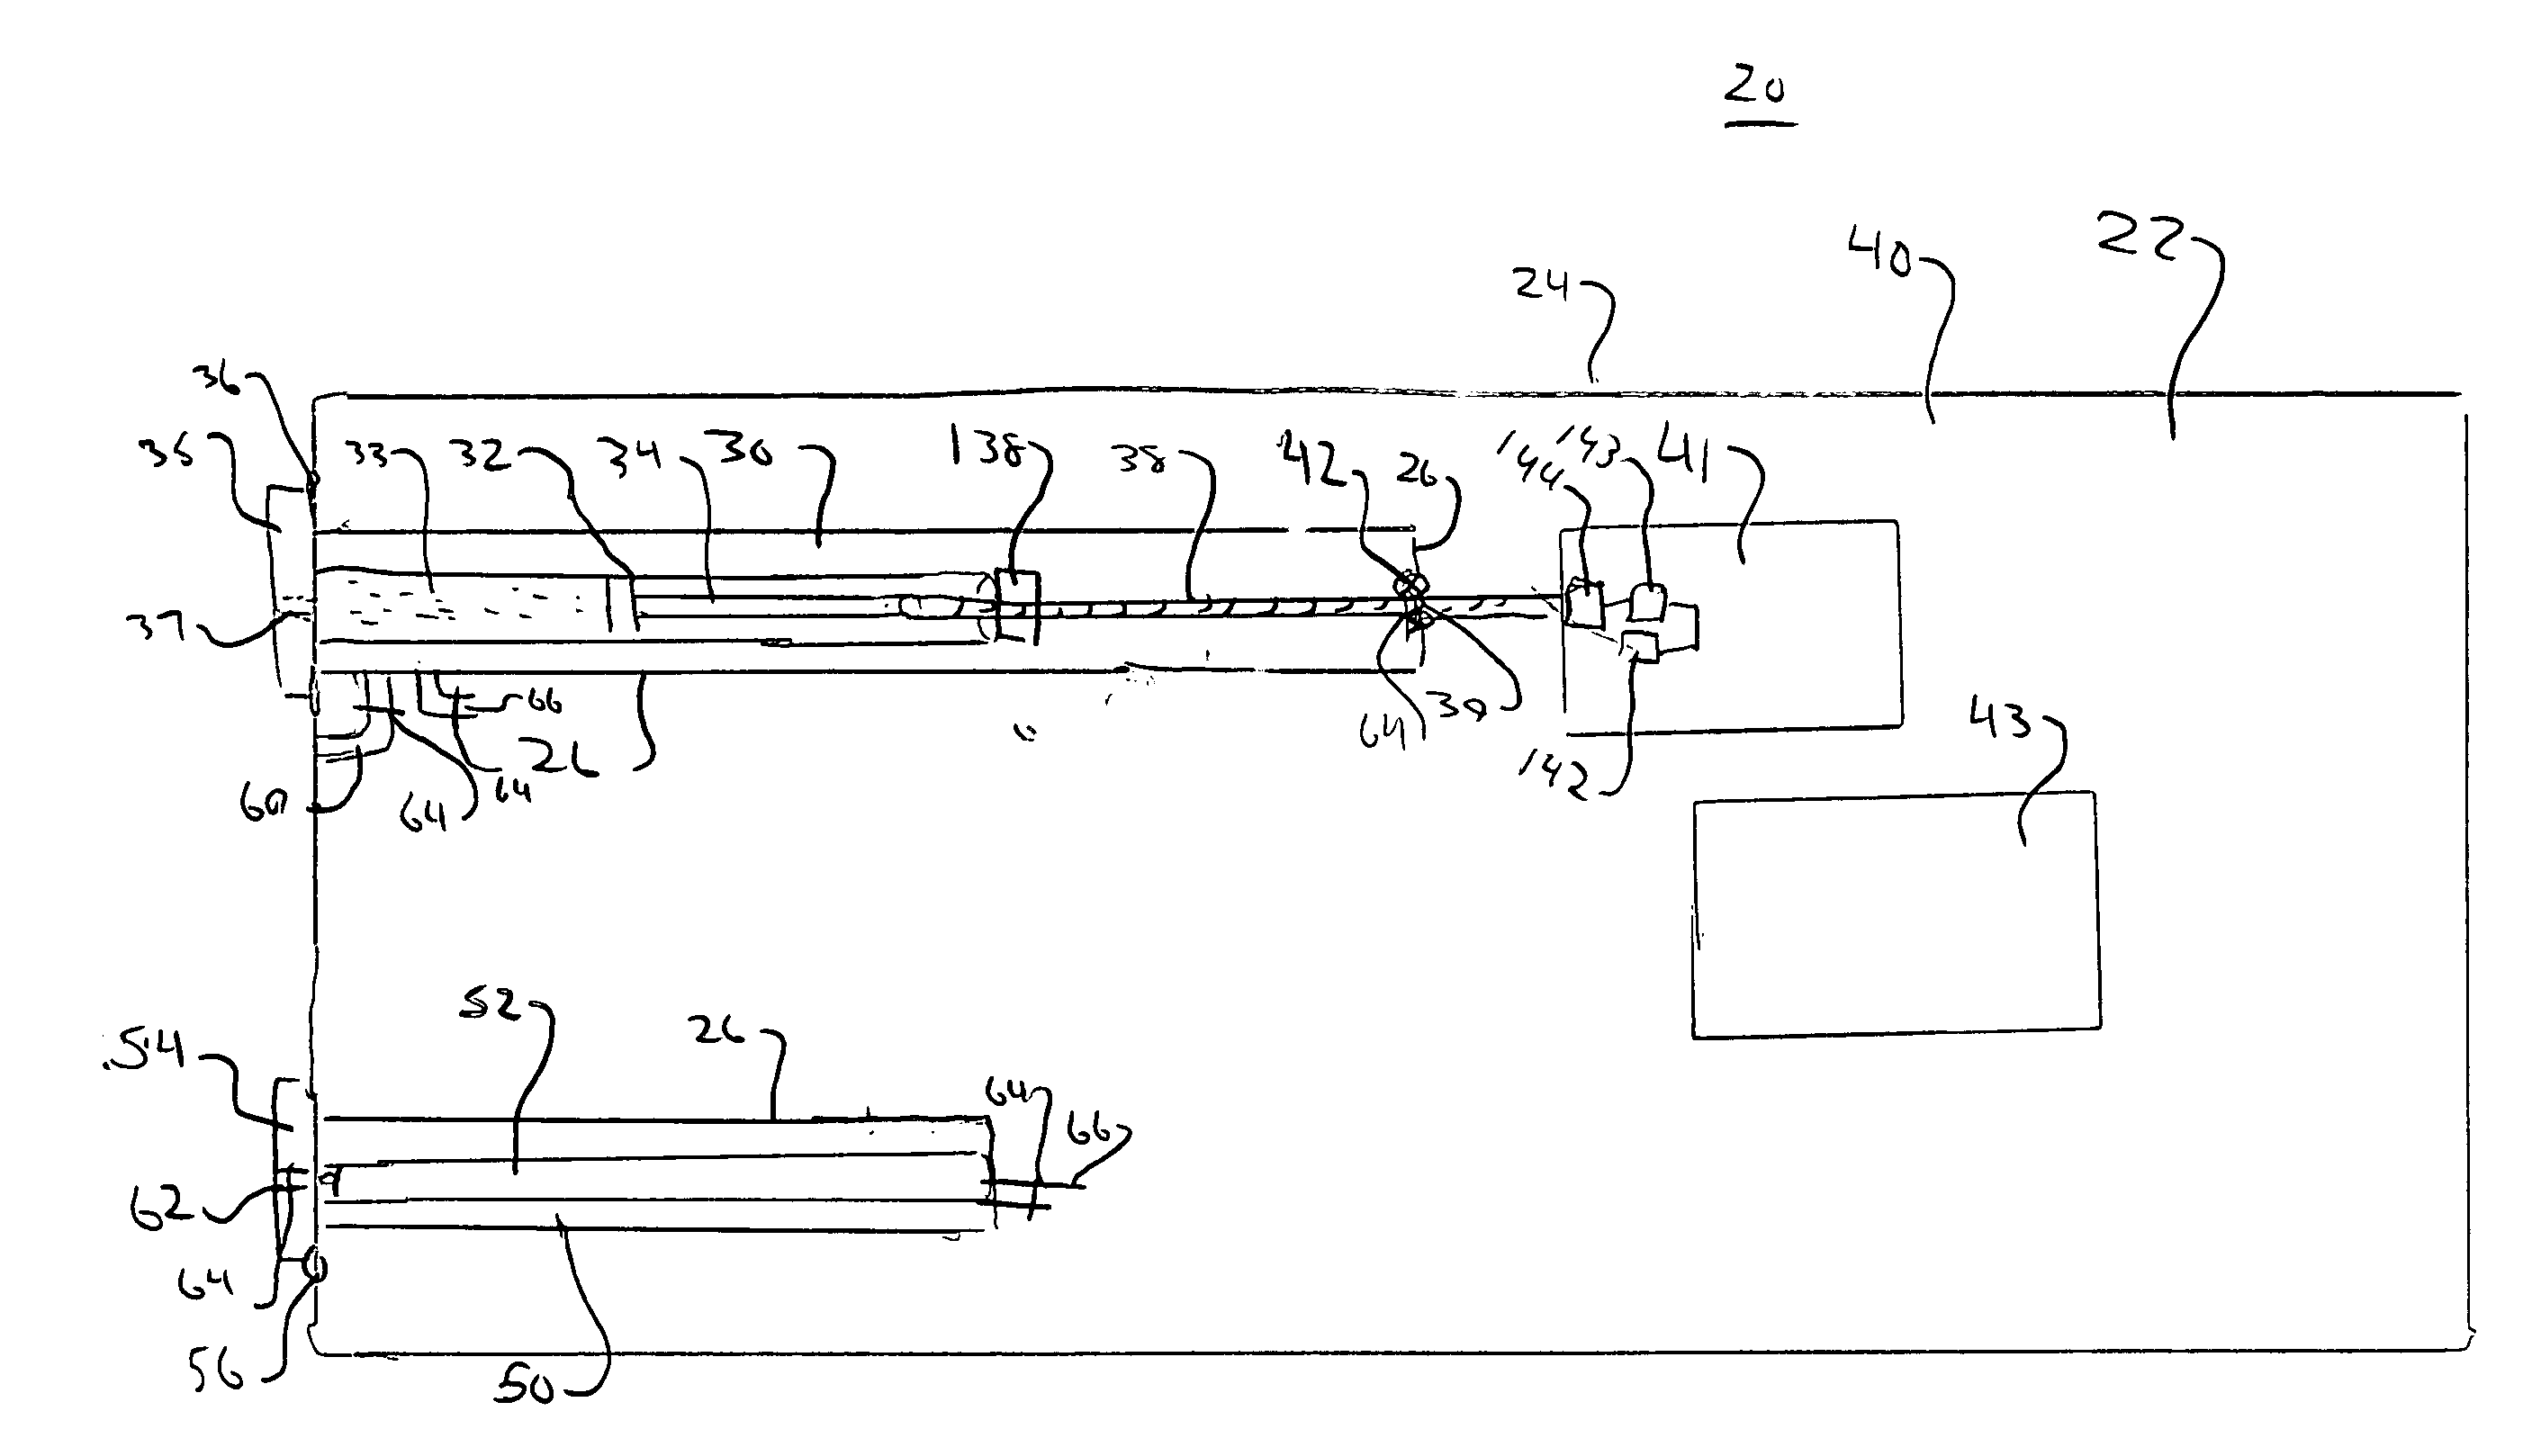 External infusion device having a casing with multiple cross-vented hermetically-sealed housings